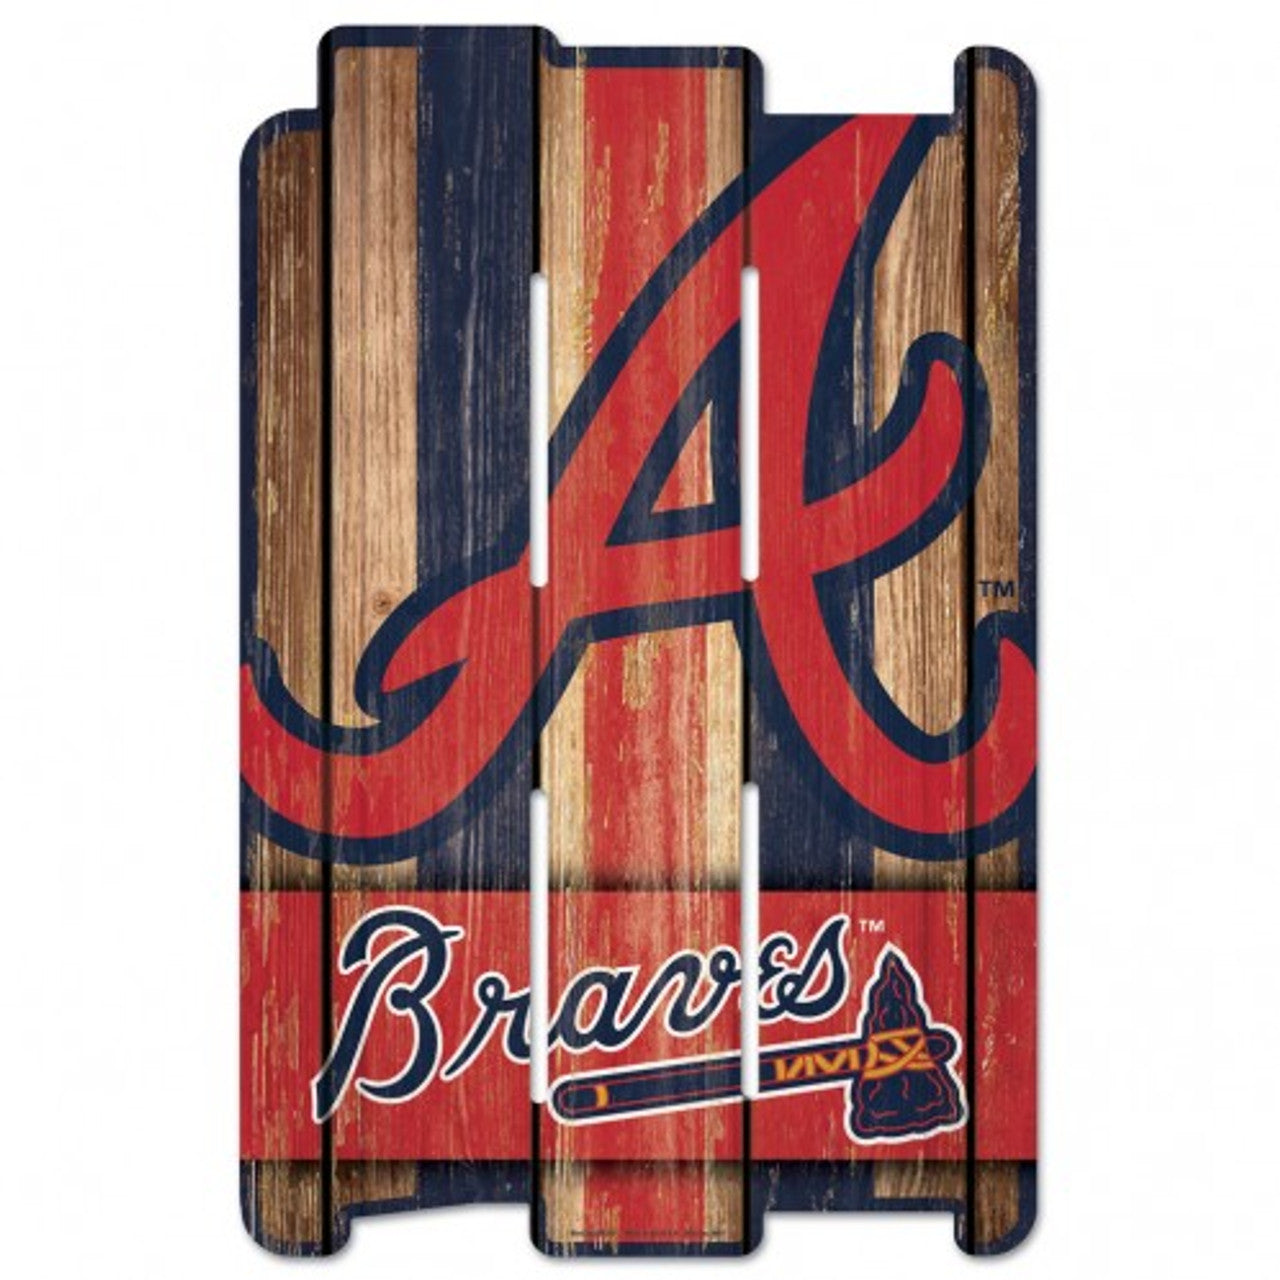 Atlanta Braves 11" x 17" Wood Fence Sign by Wincraft